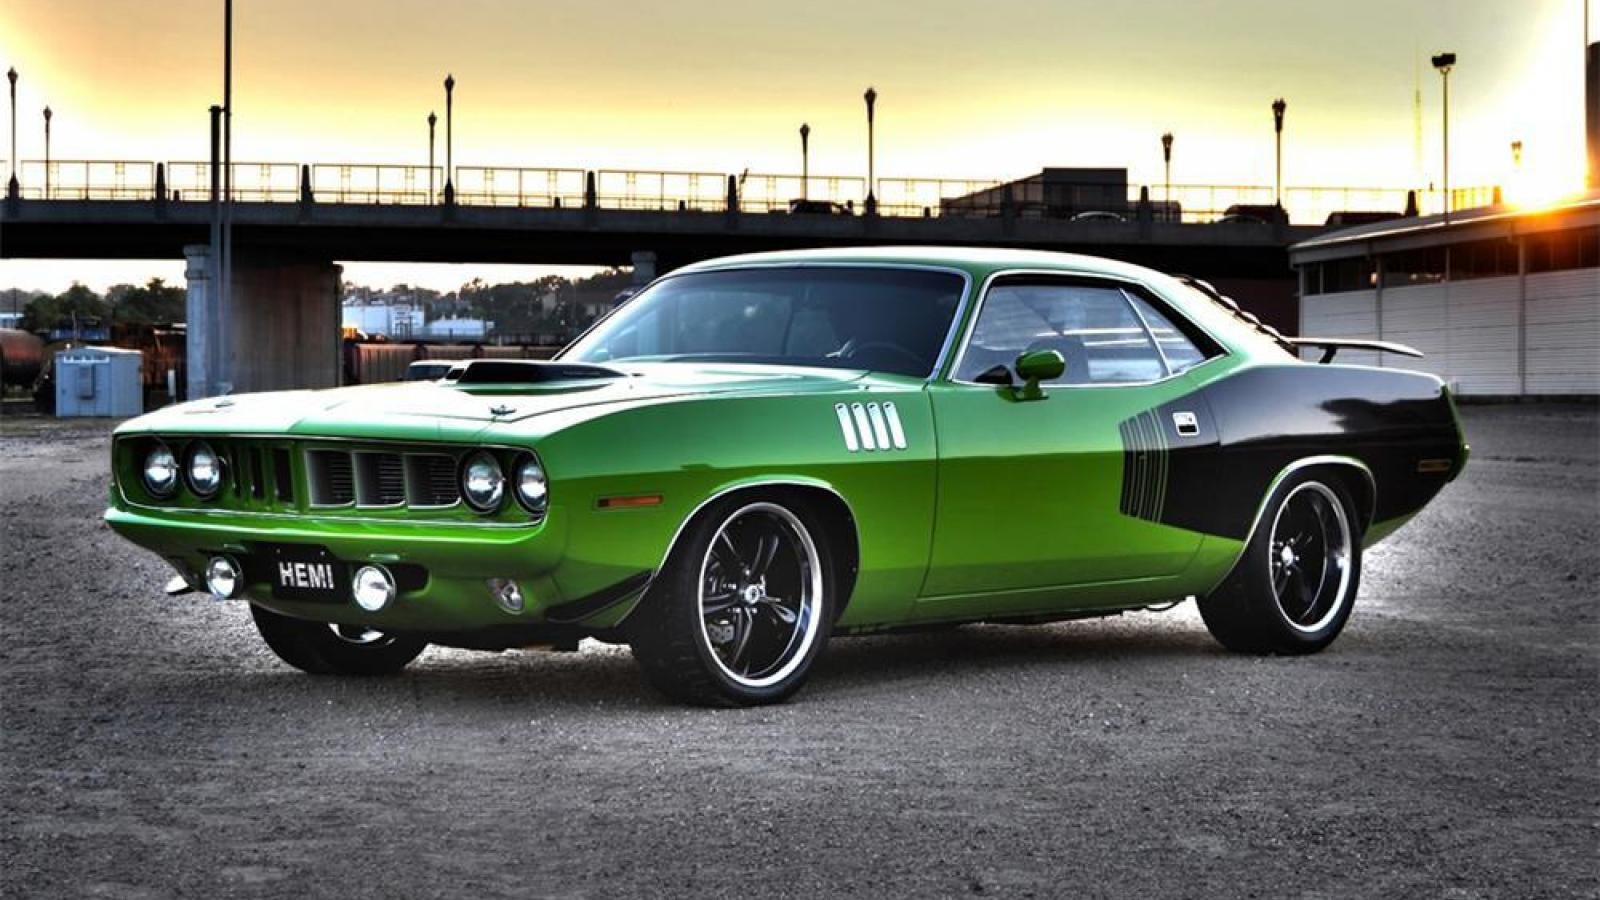 plymouth wallpaper,land vehicle,vehicle,car,muscle car,green